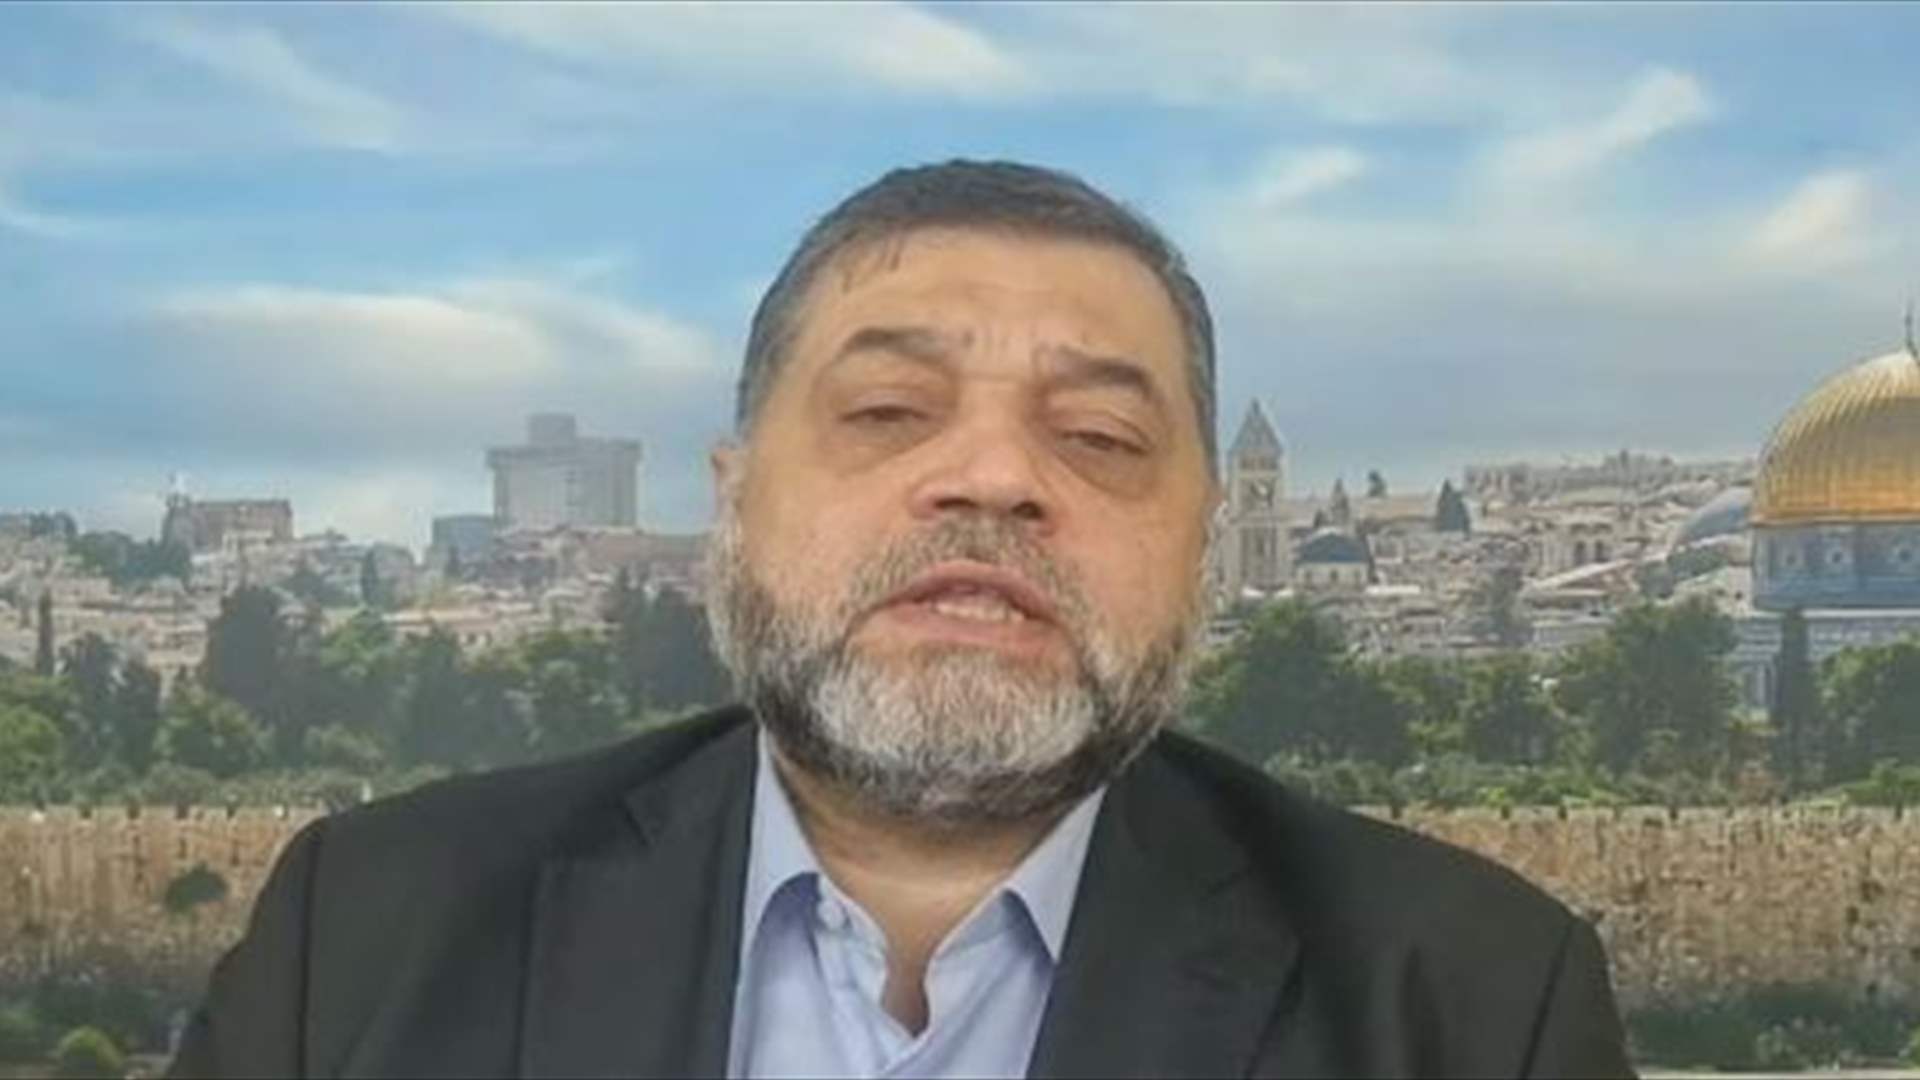 Hamas representative in Lebanon to LBCI: The displacement issue will not succeed